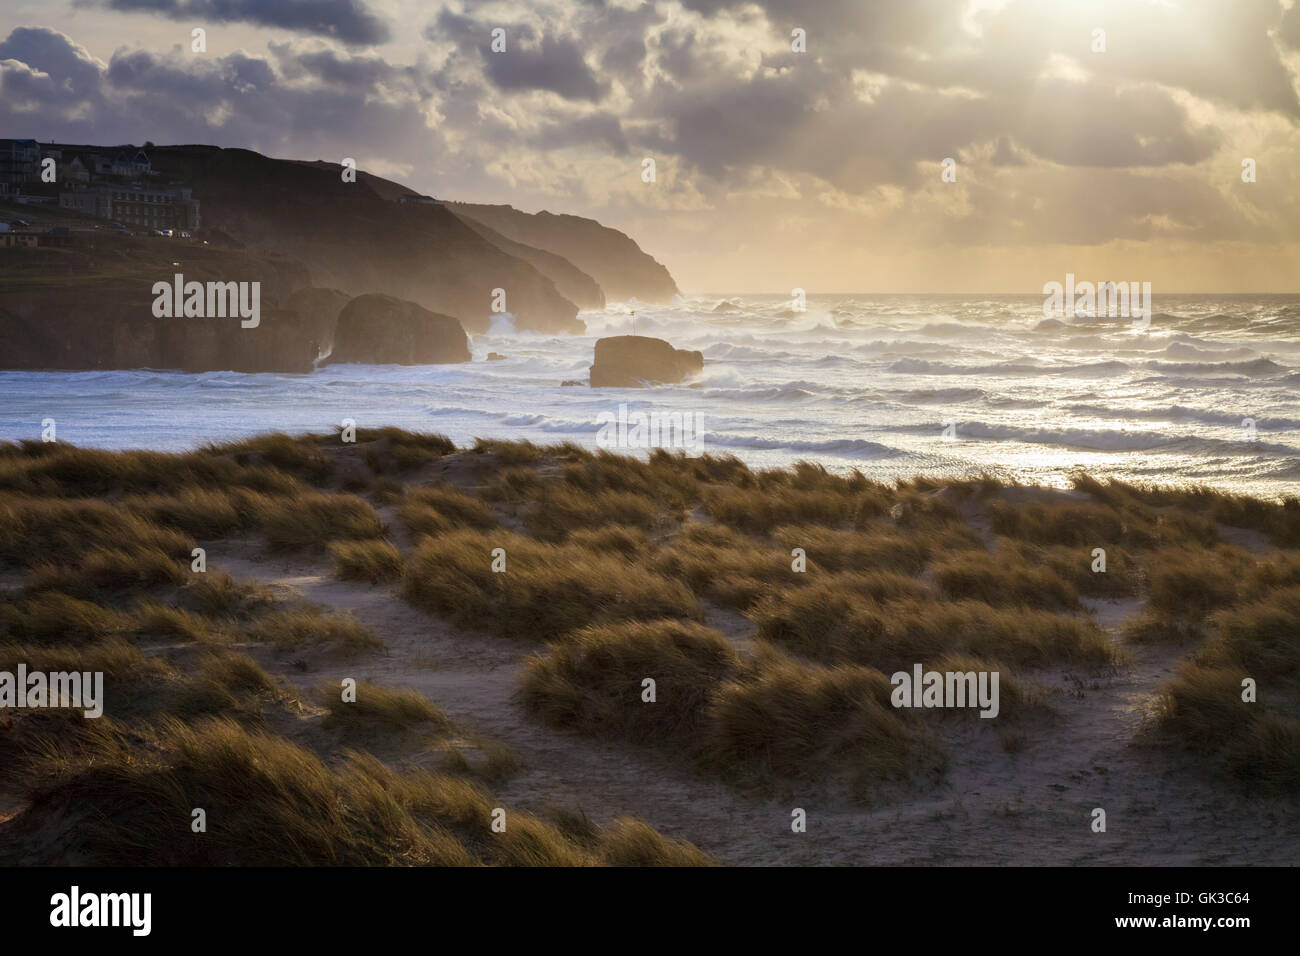 The setting sun captured from the sand dunes at Perranporth on the north coast of Cornwall. Stock Photo